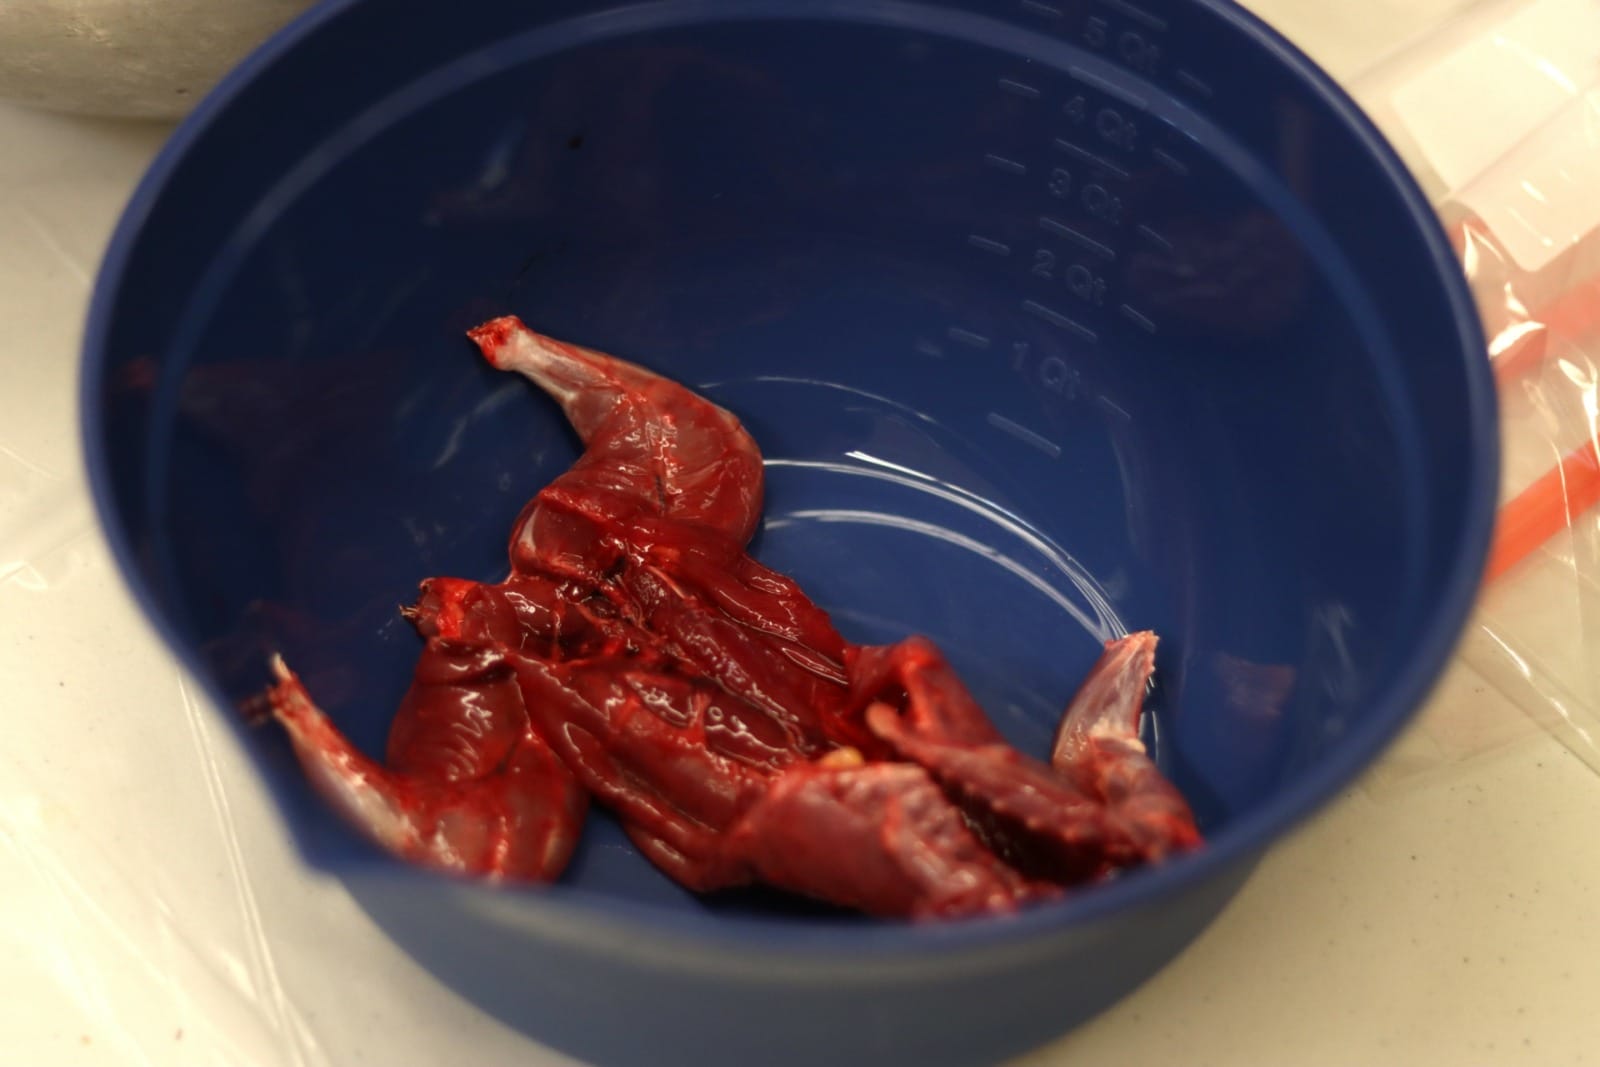 A skinned and butterflied squirrel lays in a bowl. The meat is fairly dark and bloody.